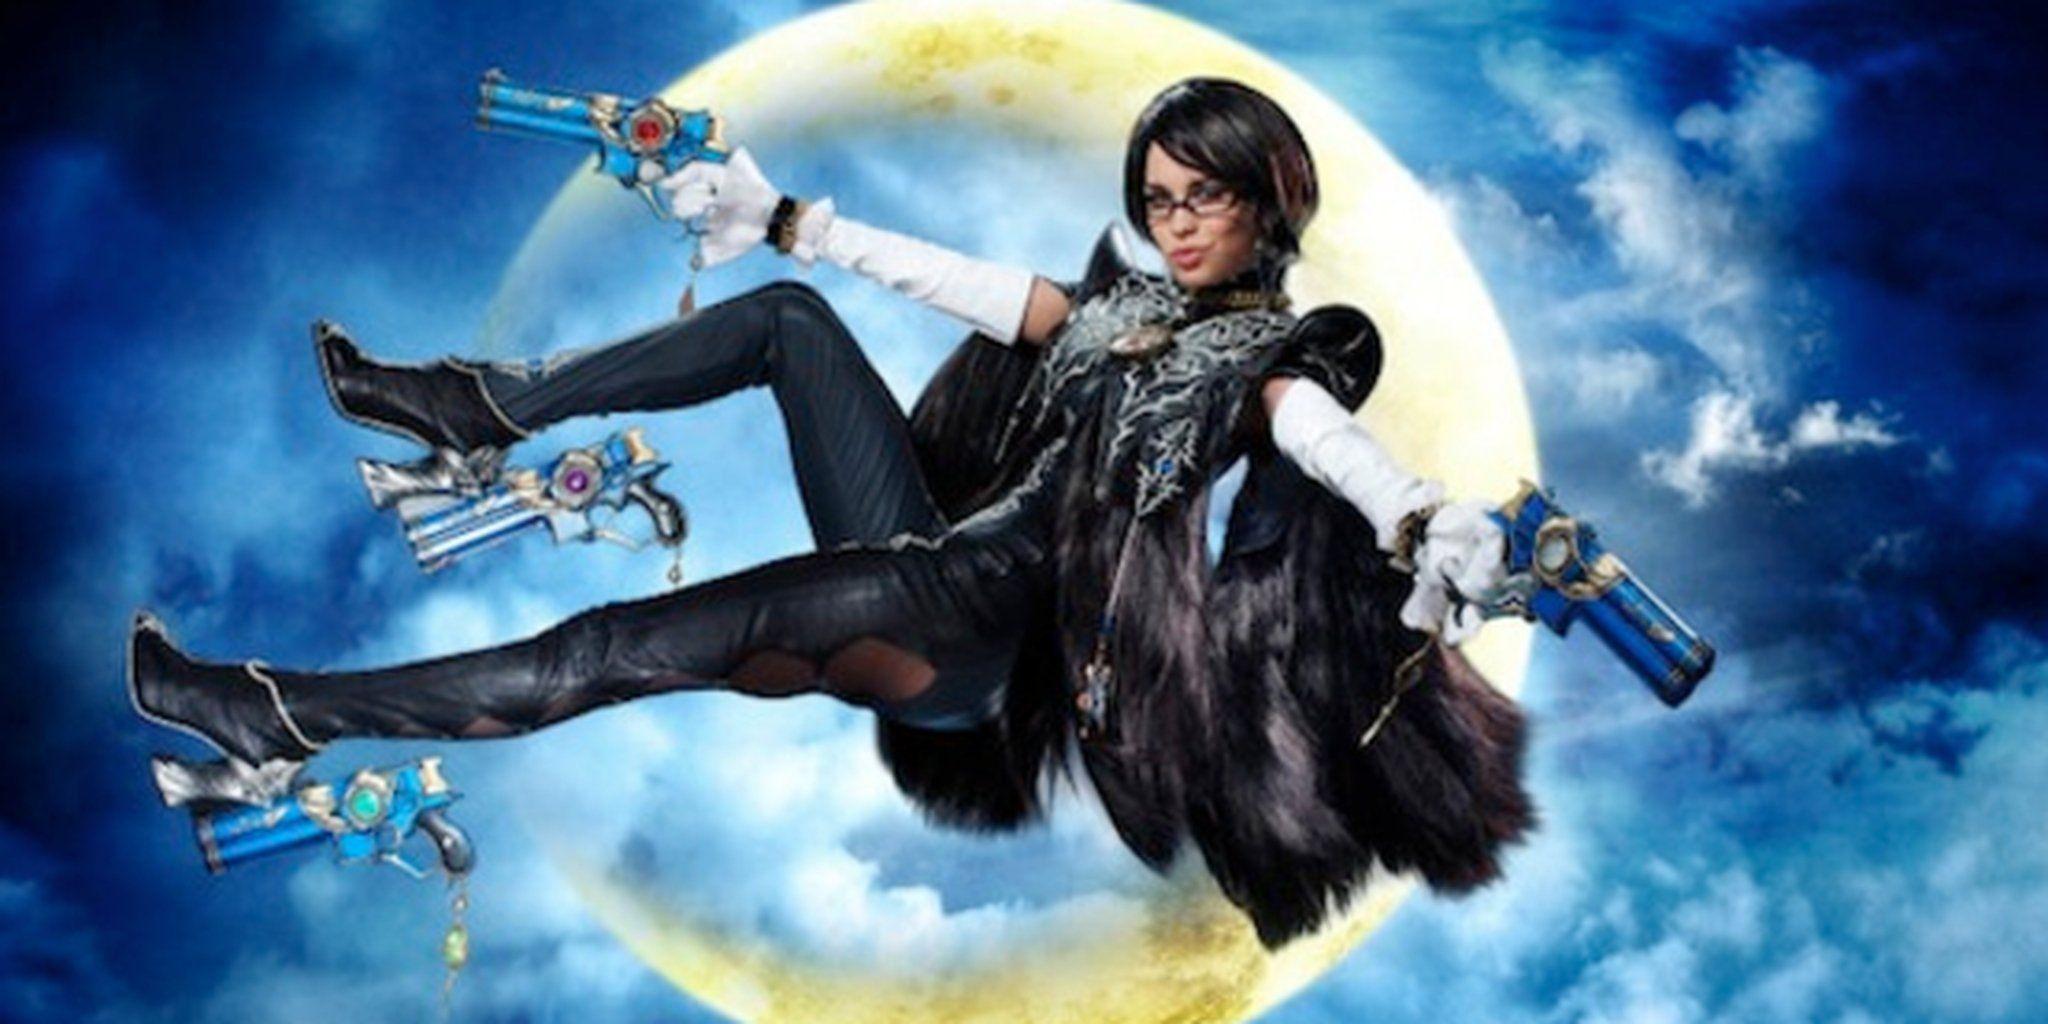 A 'Playboy' Playmate is the face of a new Bayonetta 2 campaign